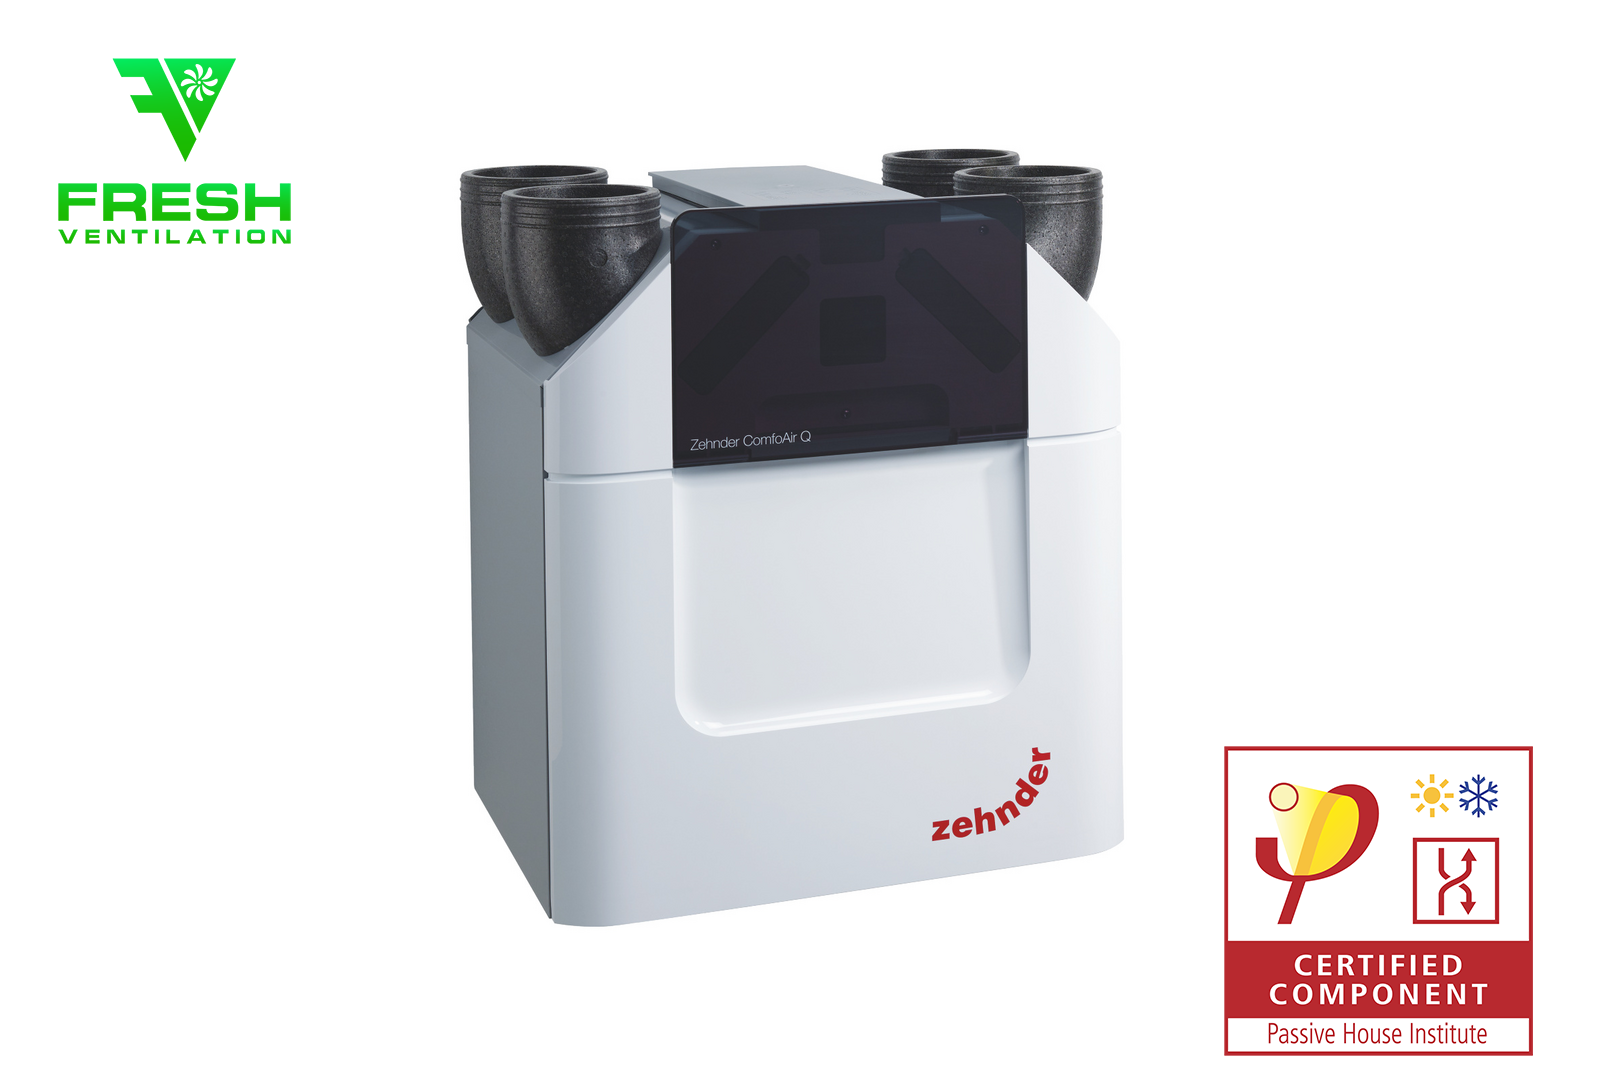 Zehnder ComfoAir Q350/Q450/Q600: Heat/Energy Recovery Ventilation Systems